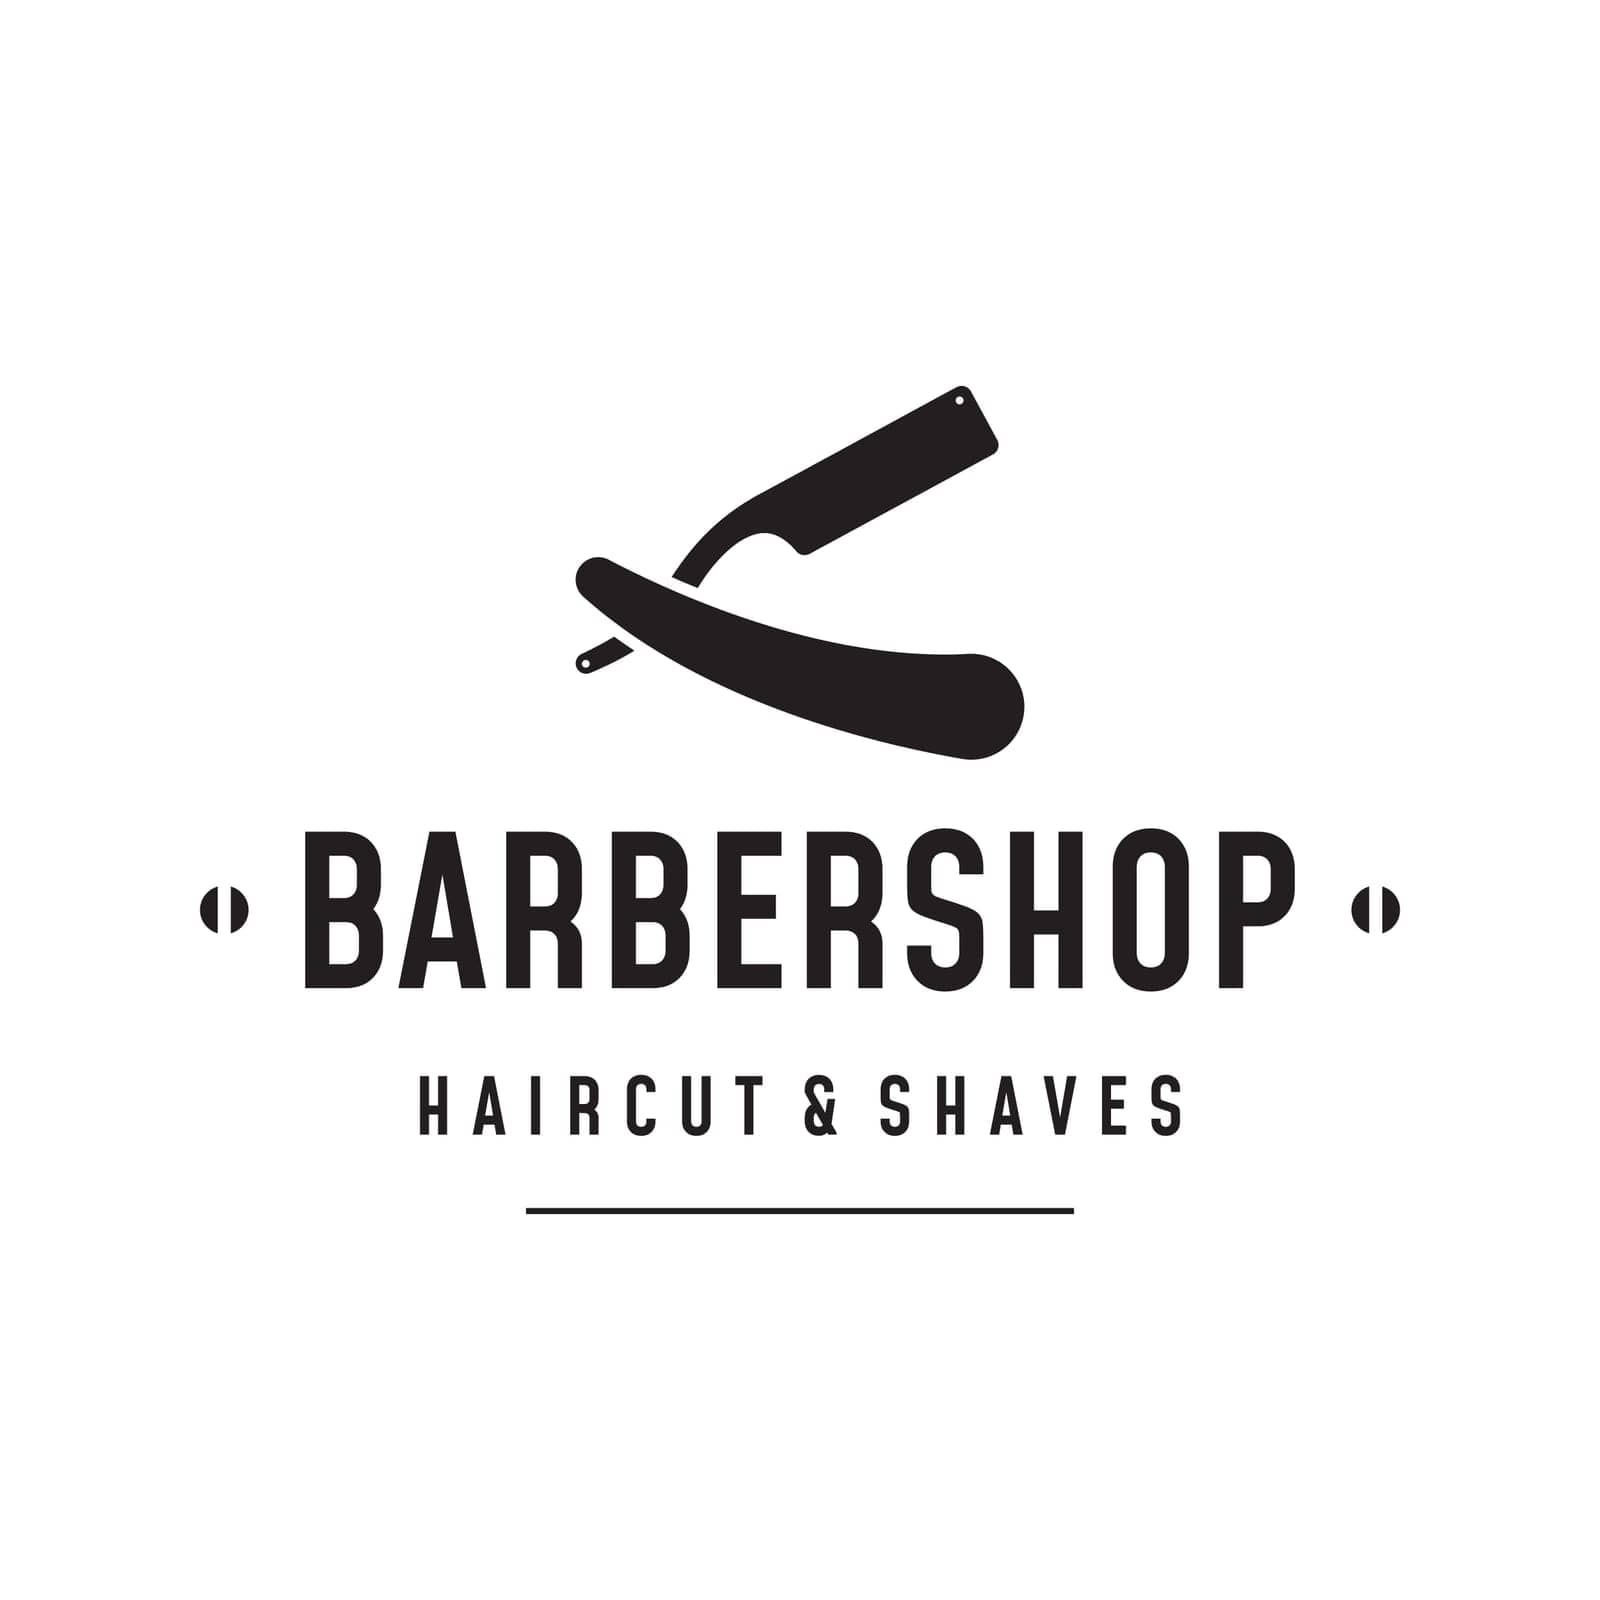 Barbershop Logo template in vintage style with the concept of scissors, razor and other tools.Logo for business, salon, label and barbershop. by Mrsongrphc